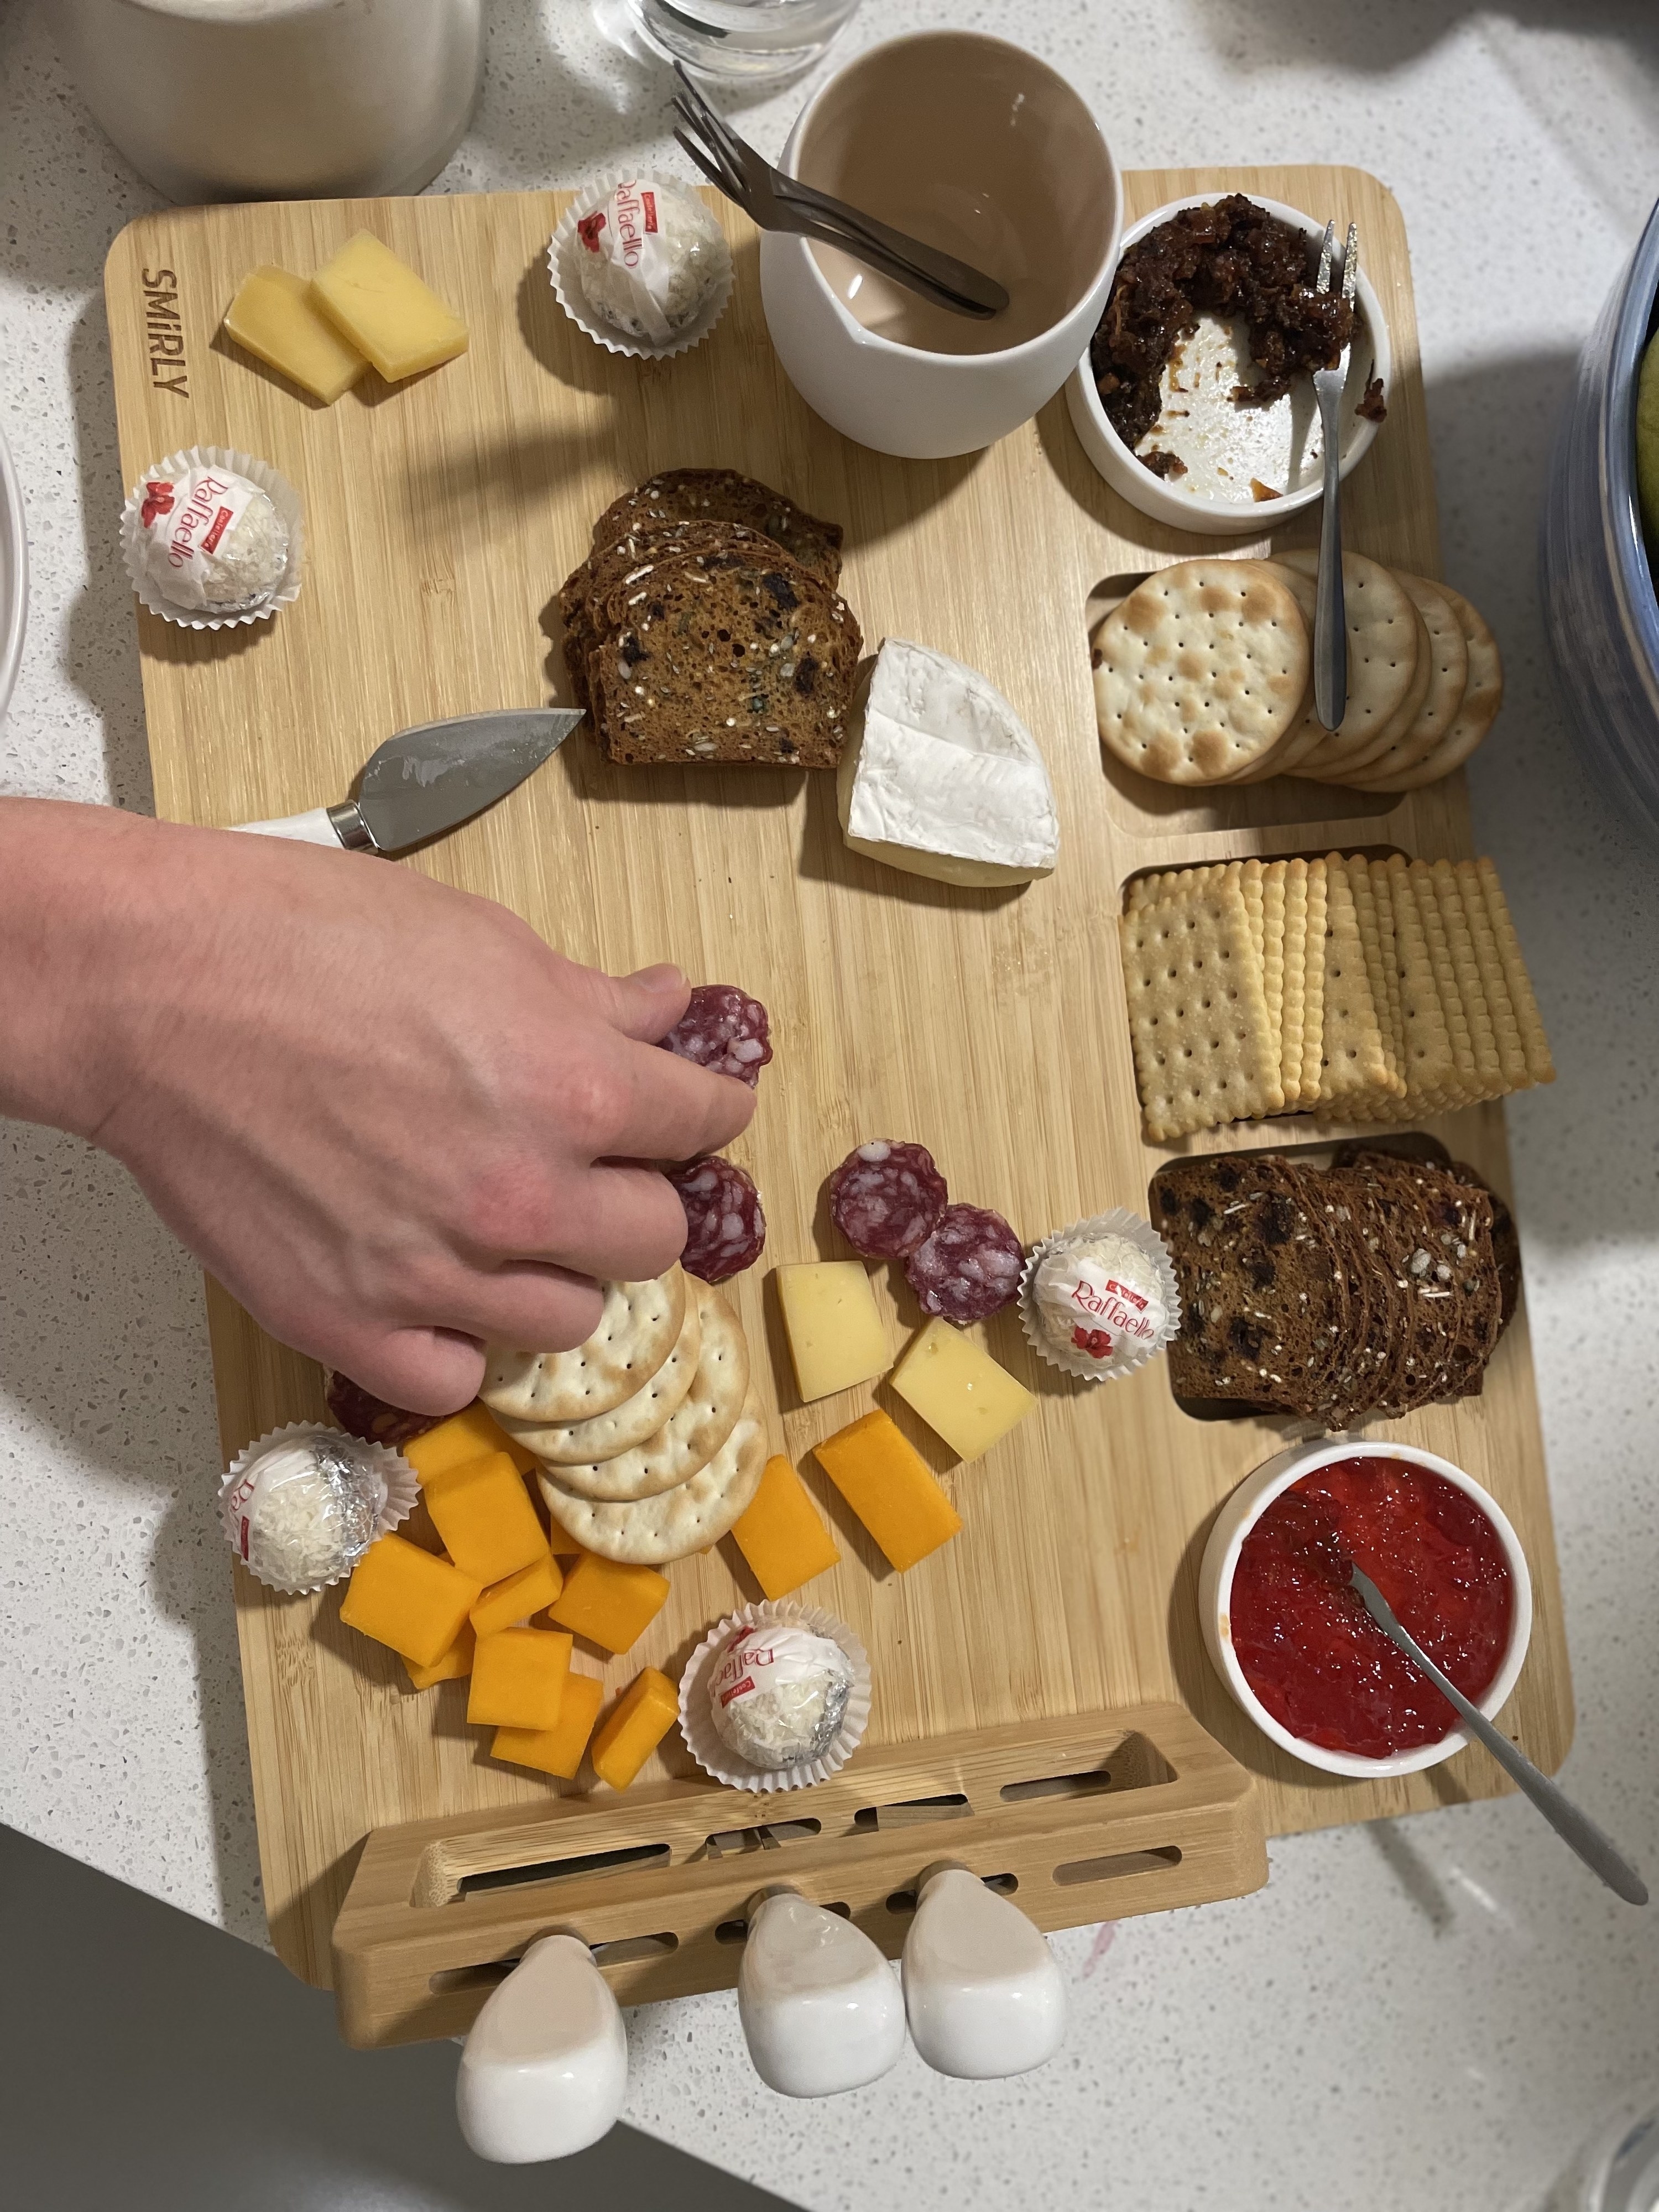 Several cheeses on the board